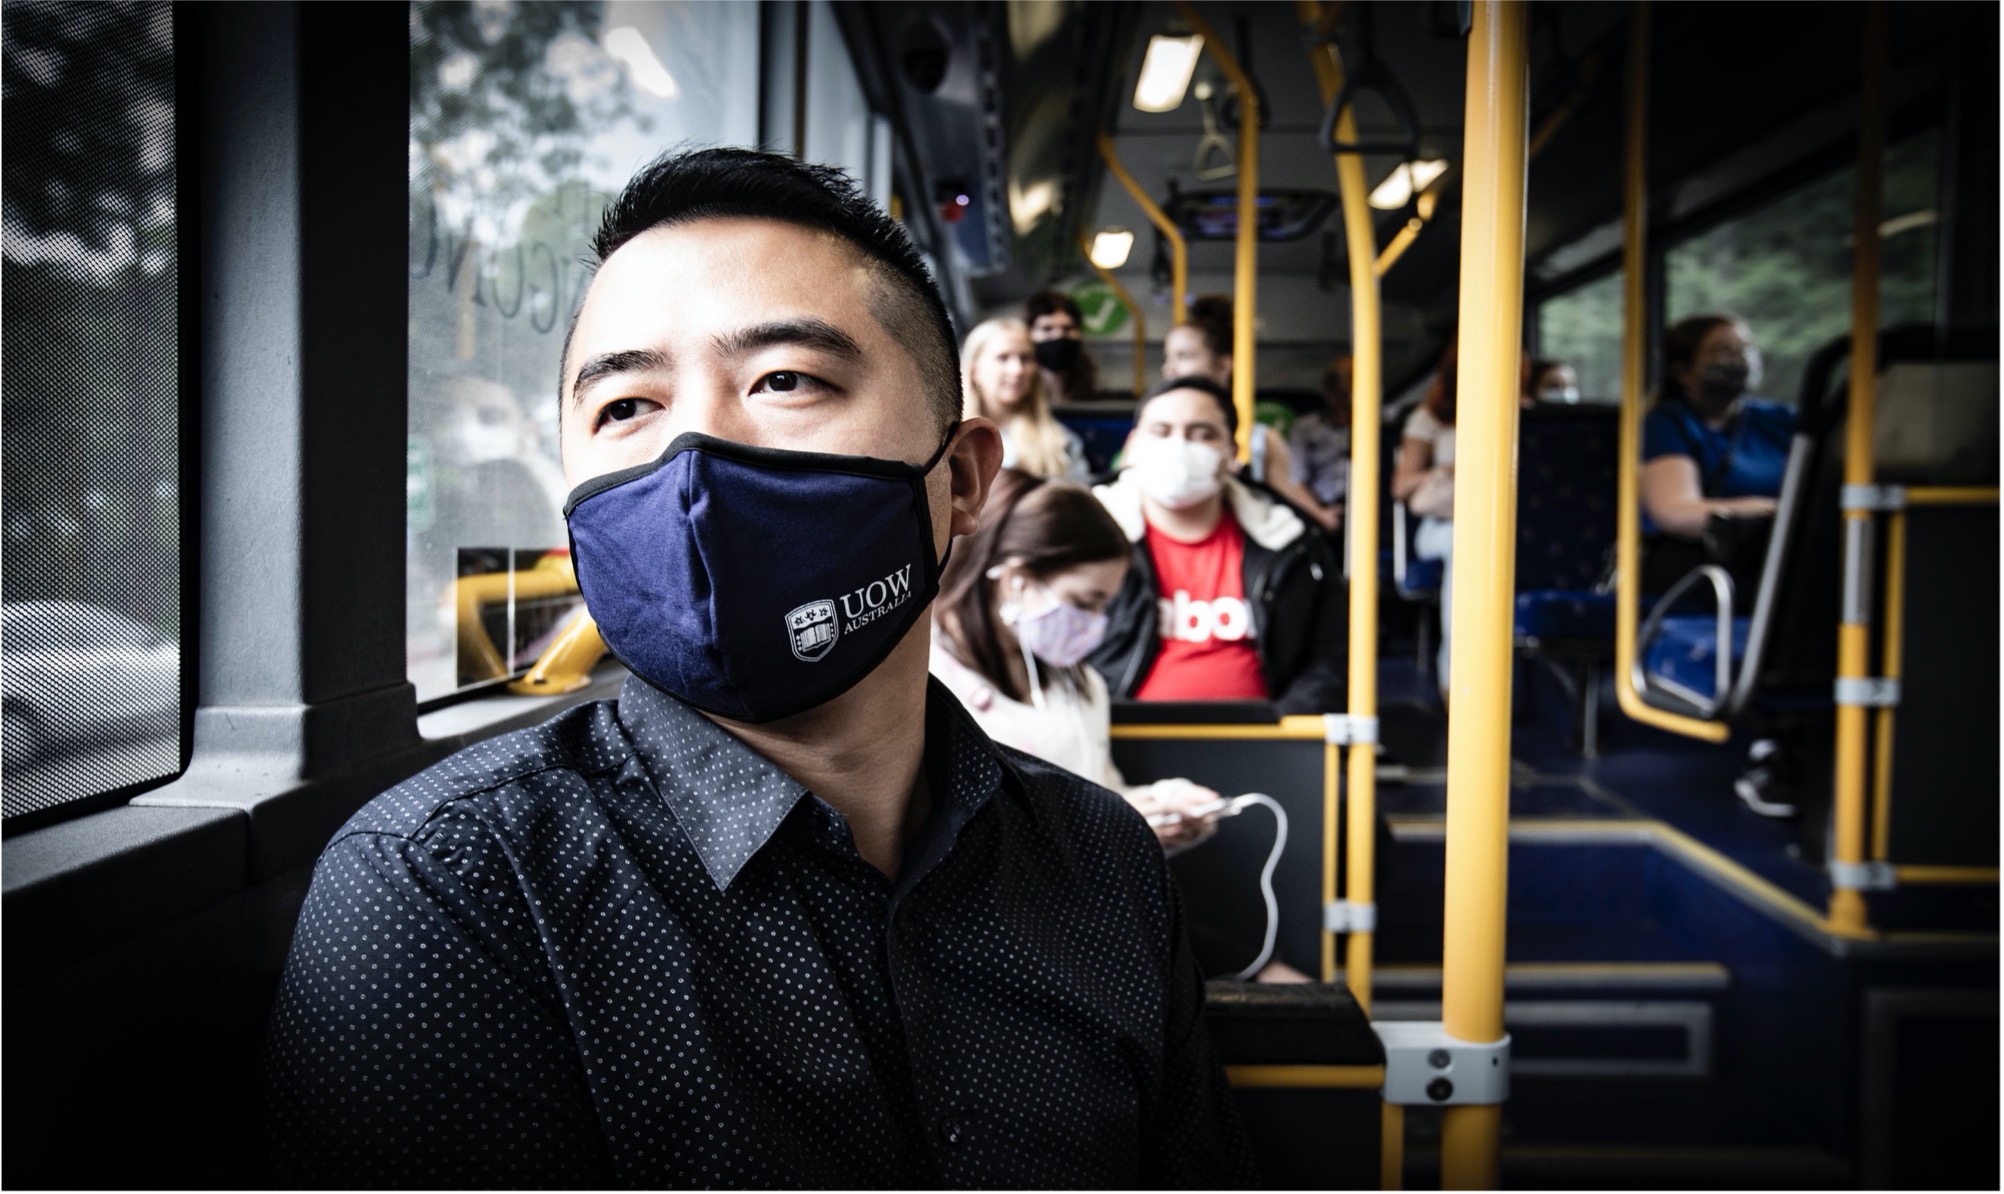 Man sitting on bus with face mask on